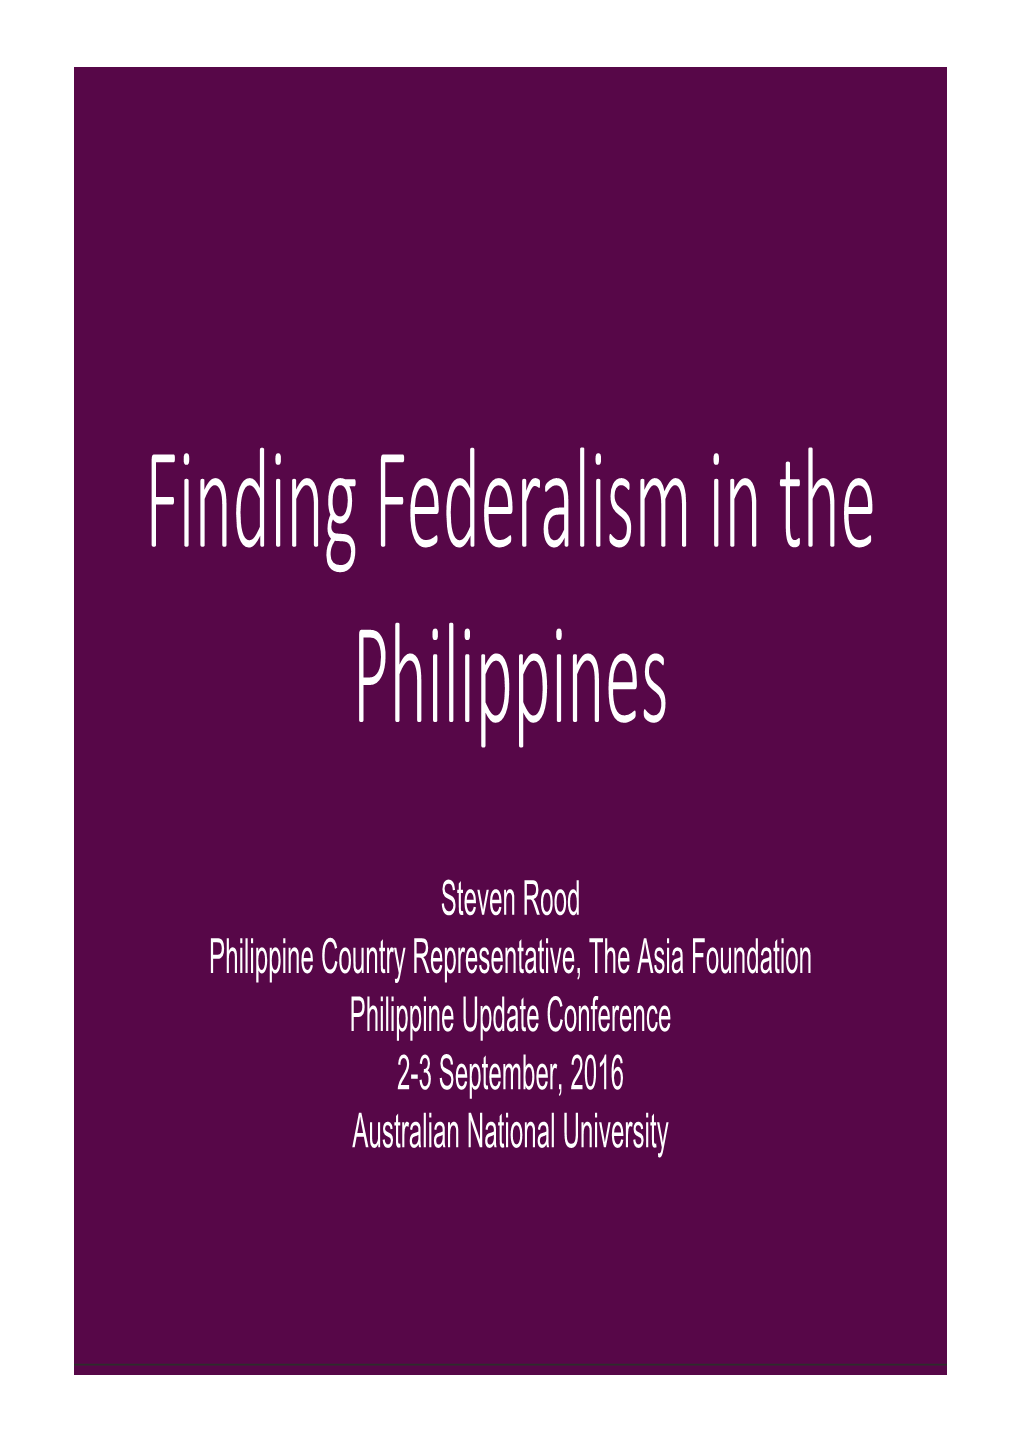 Finding Federalism in the Philippines